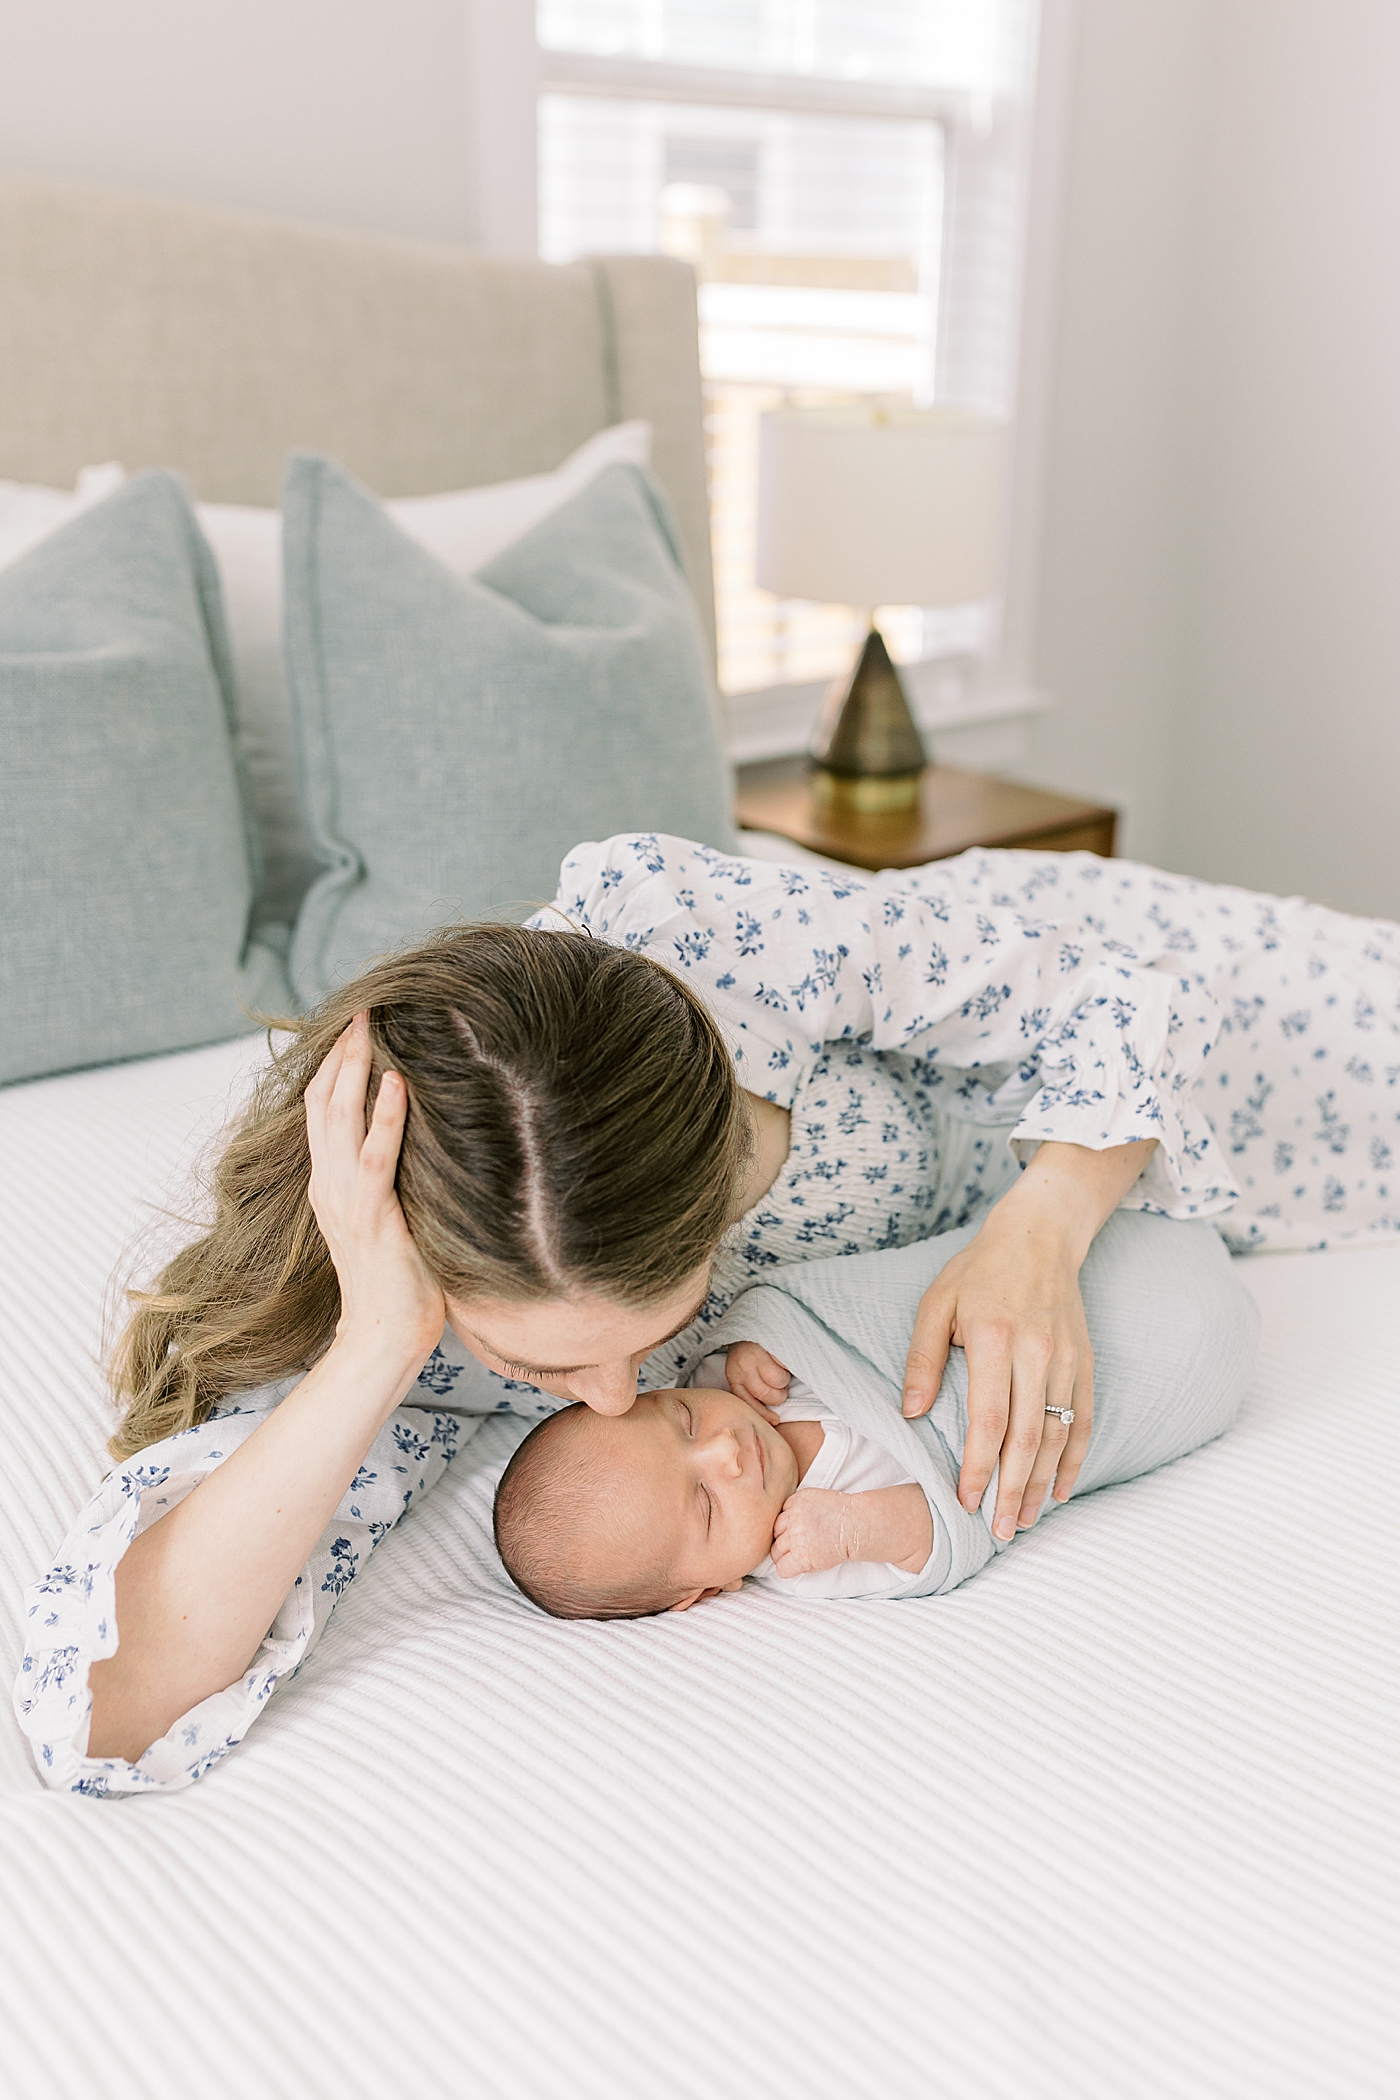 Mom kissing her new baby during lifestyle newborn photos | Image by Caitlyn Motycka